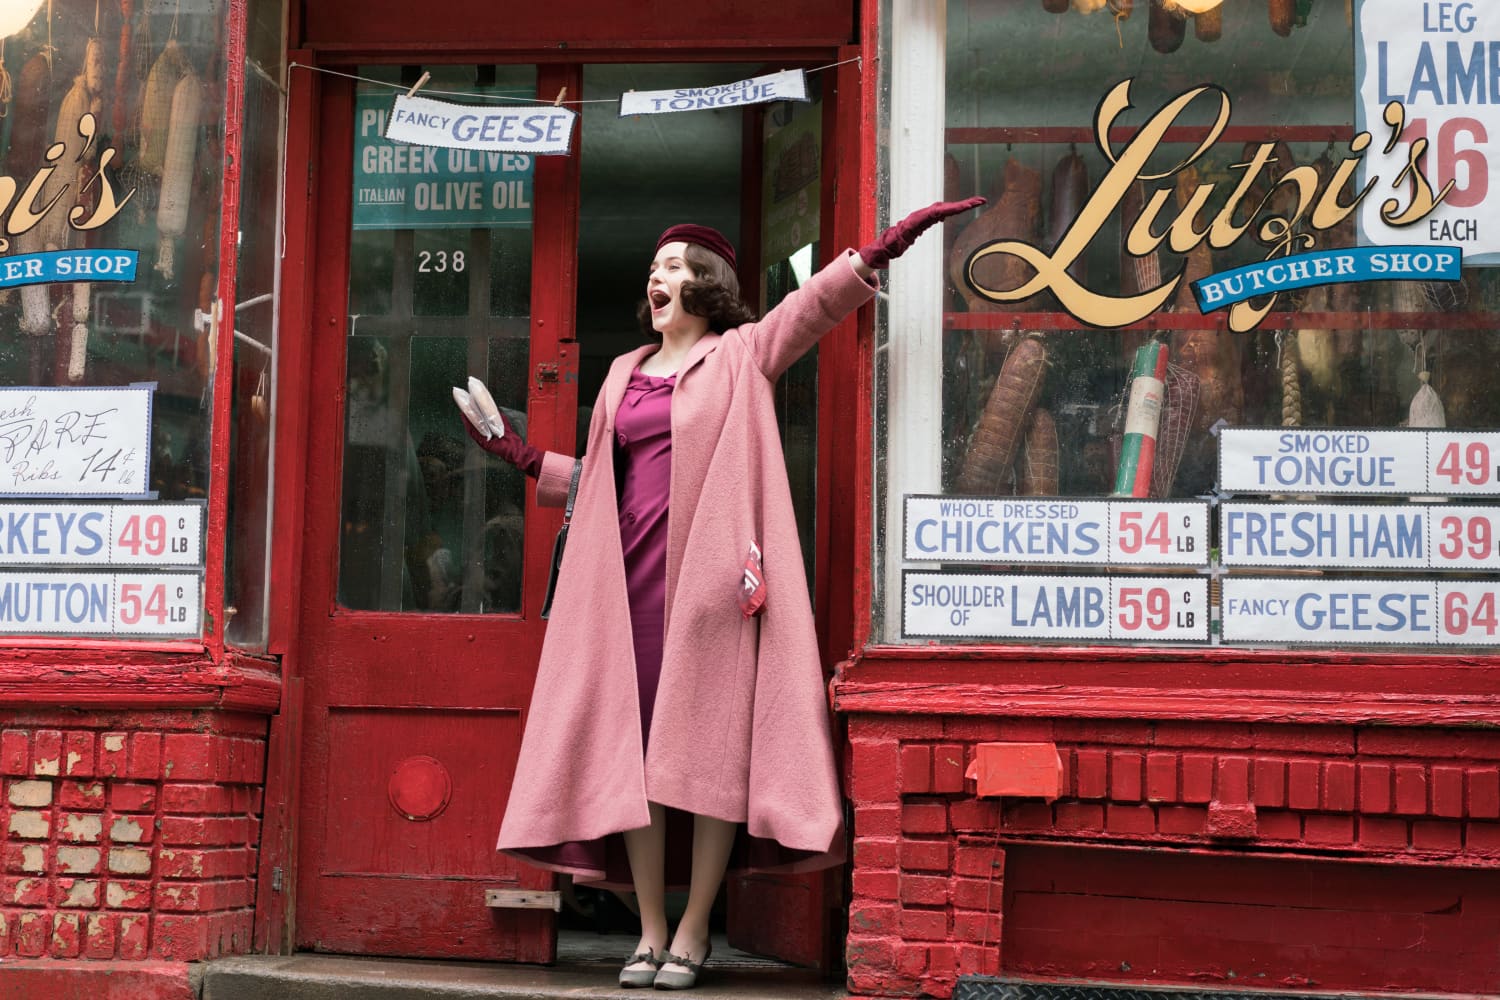 Modsy Has Redesigned These Iconic “The Marvelous Mrs. Maisel” Spaces